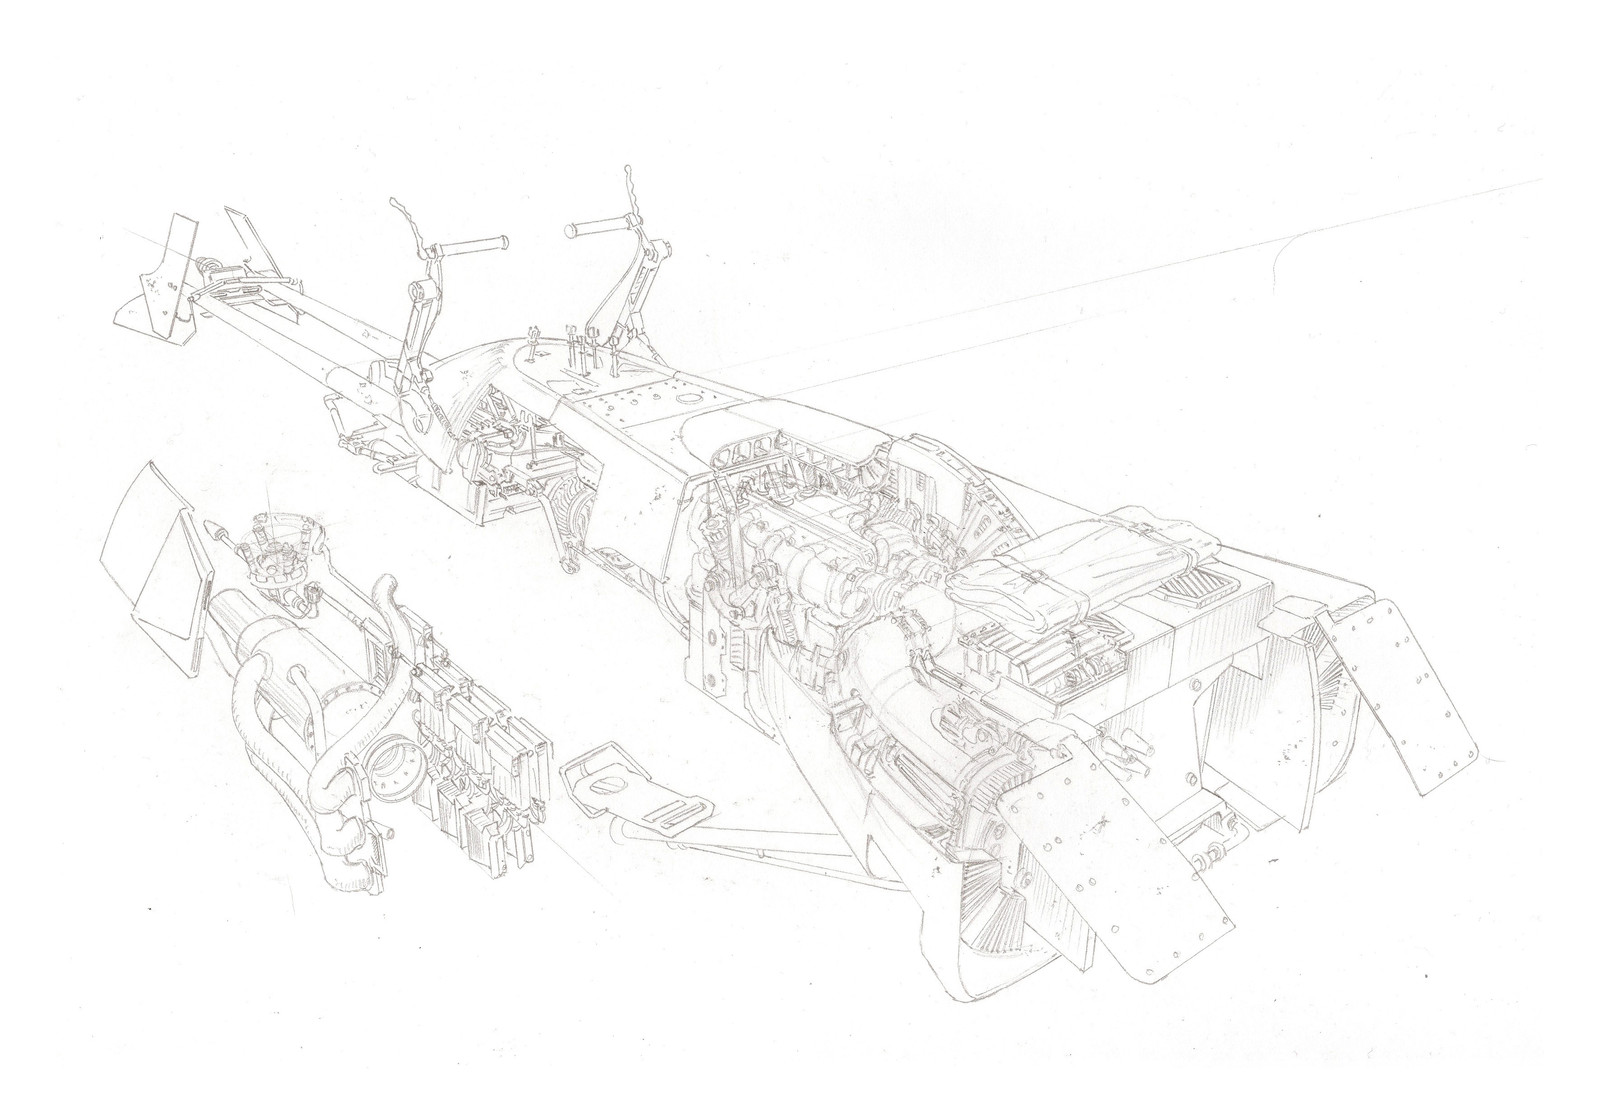 Star Wars:  of 3, 74-Z Speeder Bike pencil stage. Although there were several stages to go through including choosing a view that will fit on the page best and would show off as much as machinery as possible here is the final pencil art.
